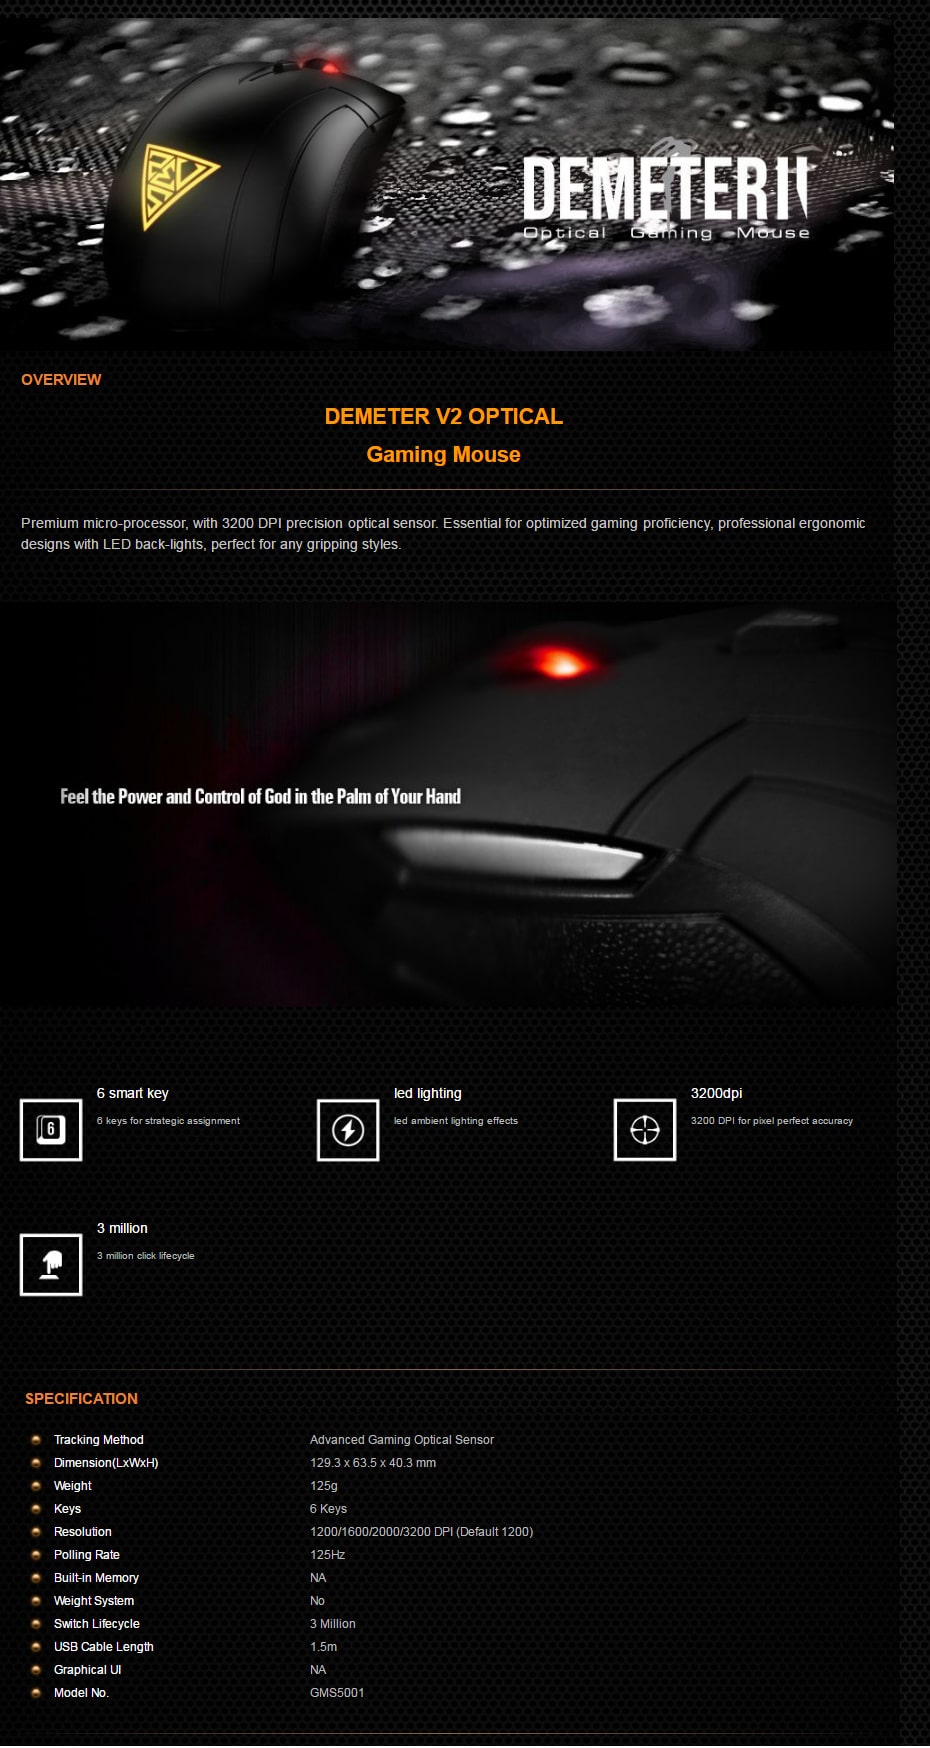 Gamdias Demeter V2 Optical Gaming Mouse features